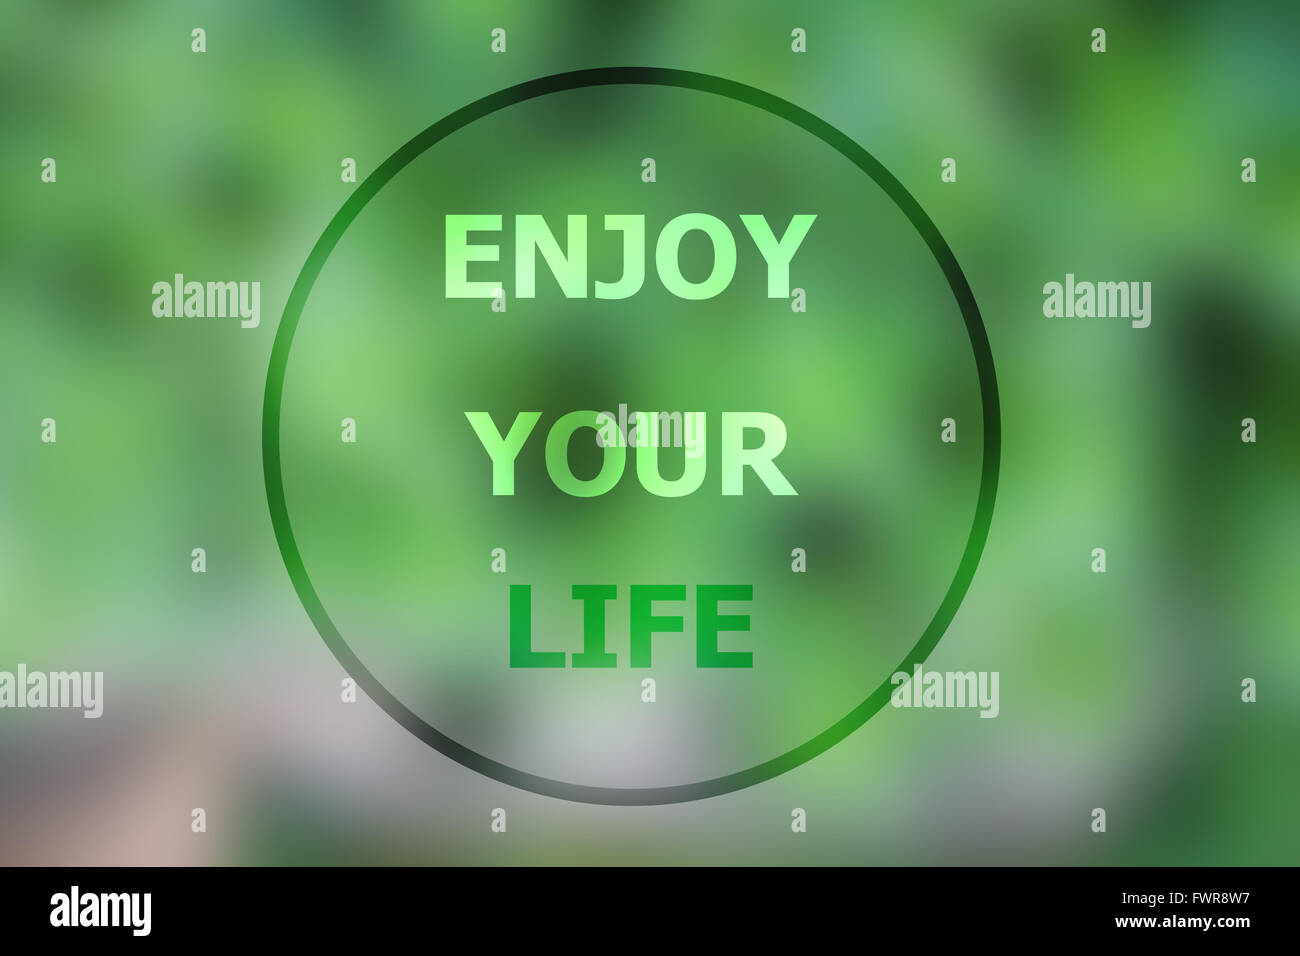 Enjoy your life inspirational quote on blurred background Stock Photo